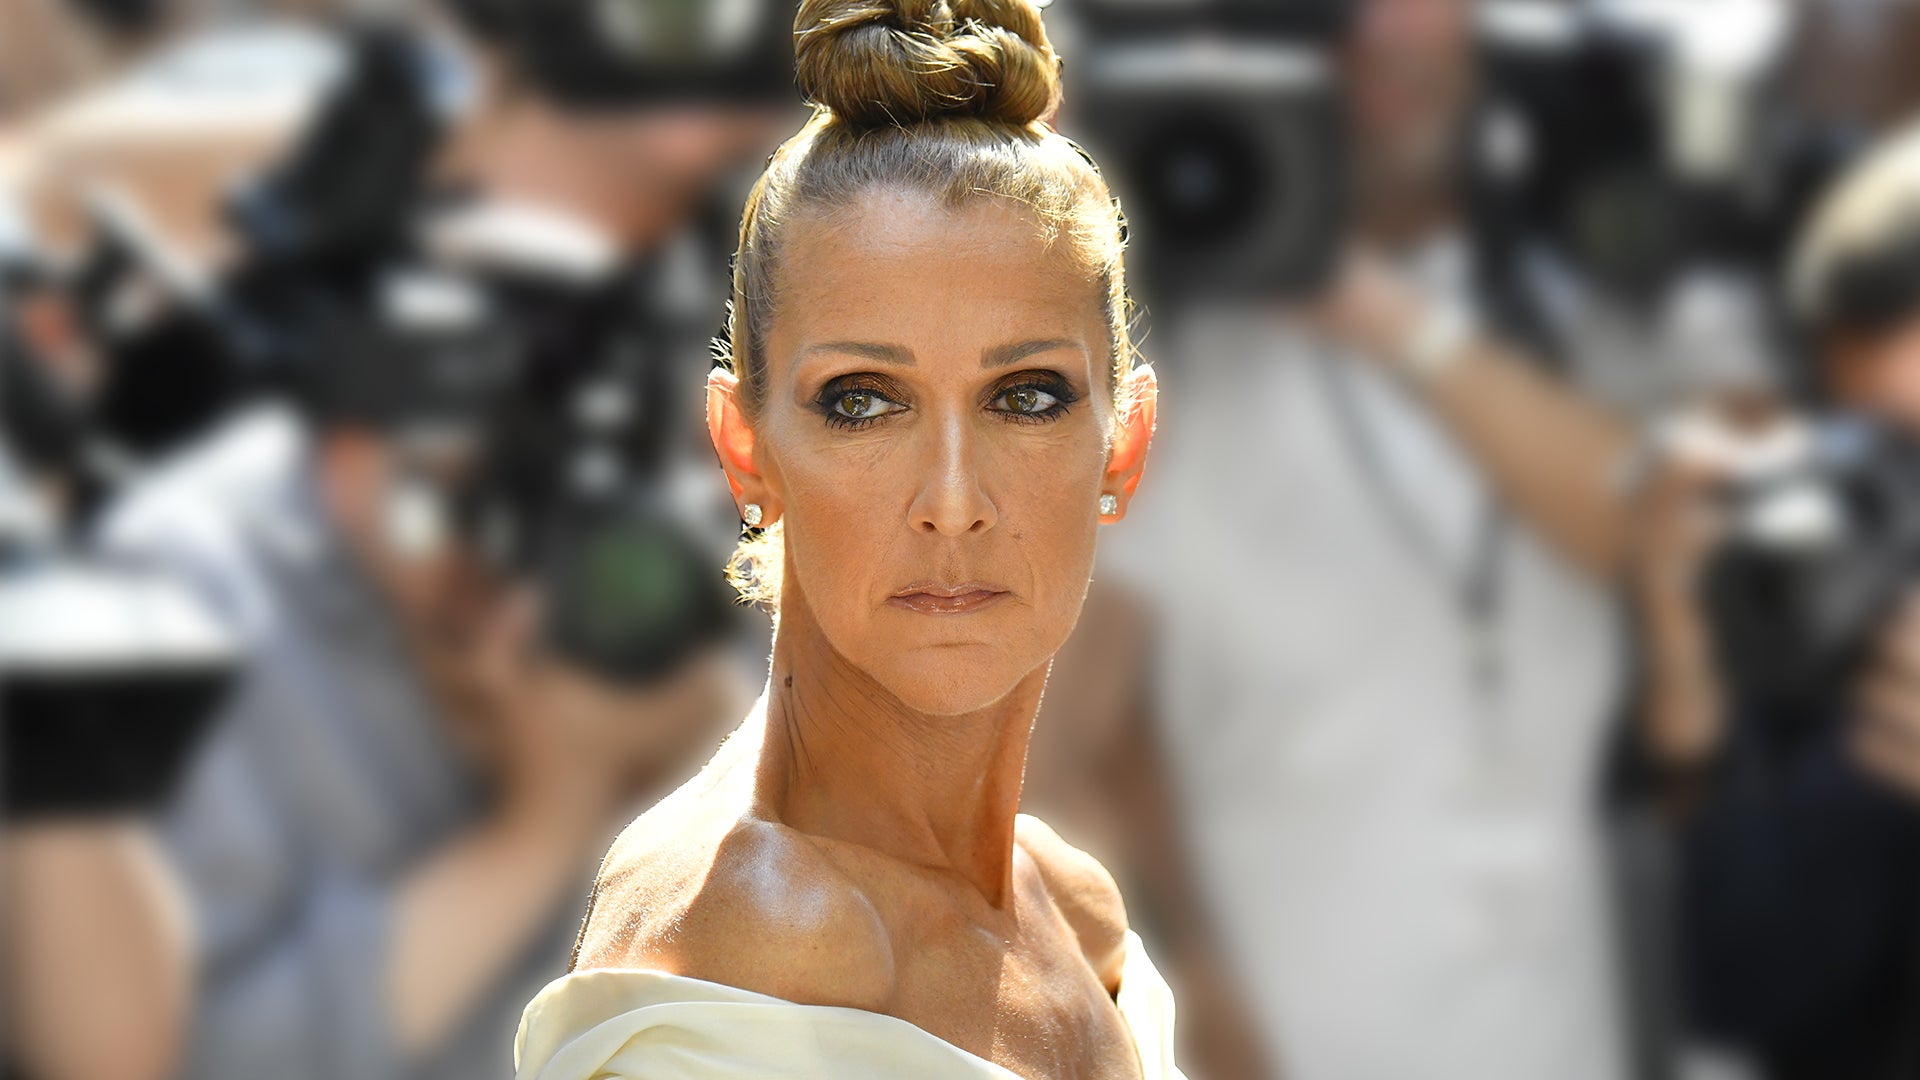 Celine Dion Cancels All Upcoming Tour Dates Amid Ongoing Health Struggle With Stiff Person Syndrome